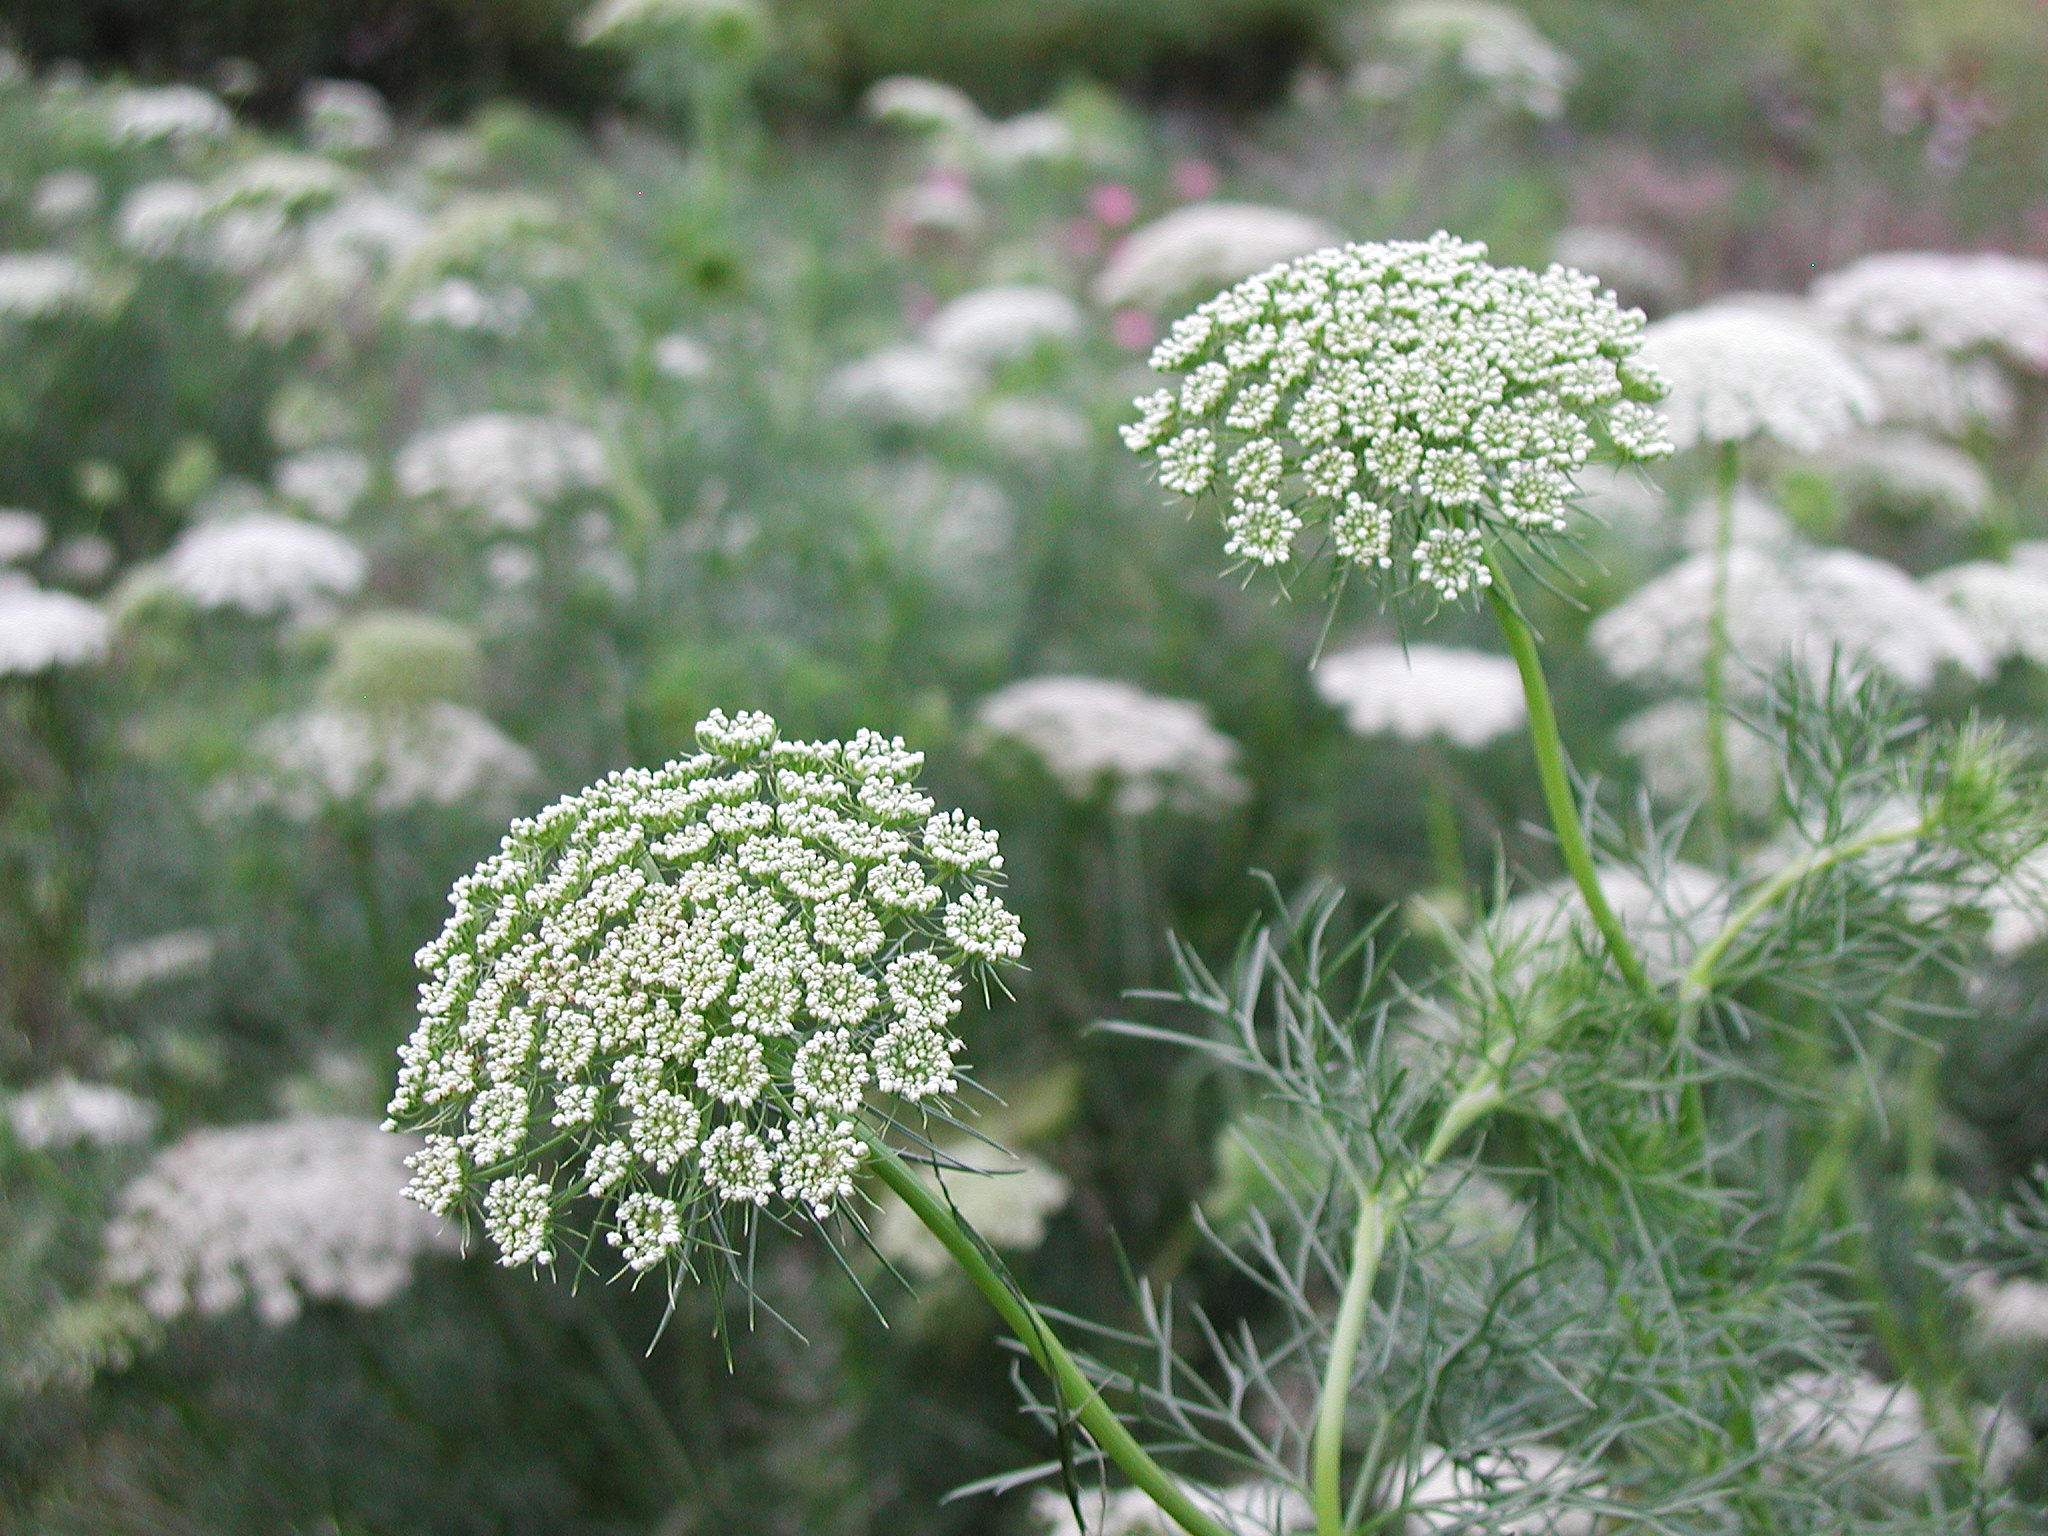 By Dwight Sipler from Stow, MA, USA - Ammi Visnaga, CC BY 2.0, https://commons.wikimedia.org/w/index.php?curid=25225795